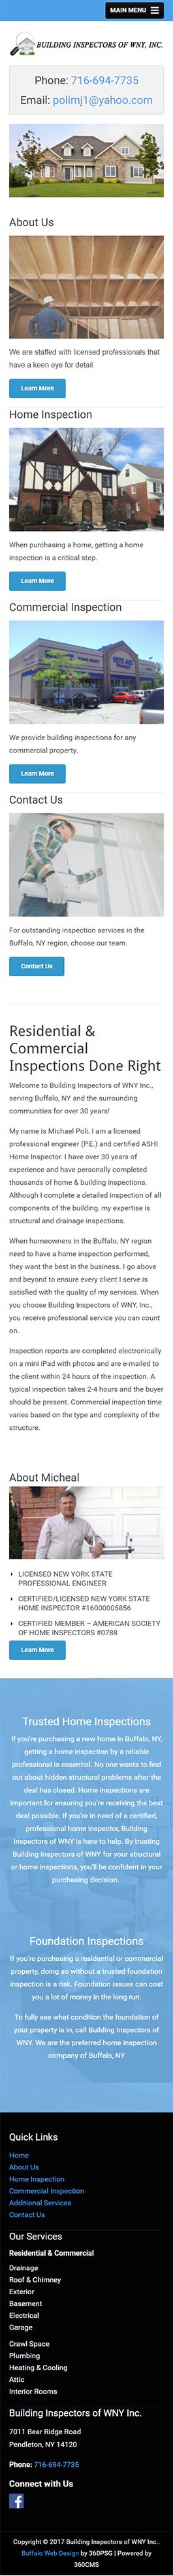 Building Inspectors of WNY Mobile